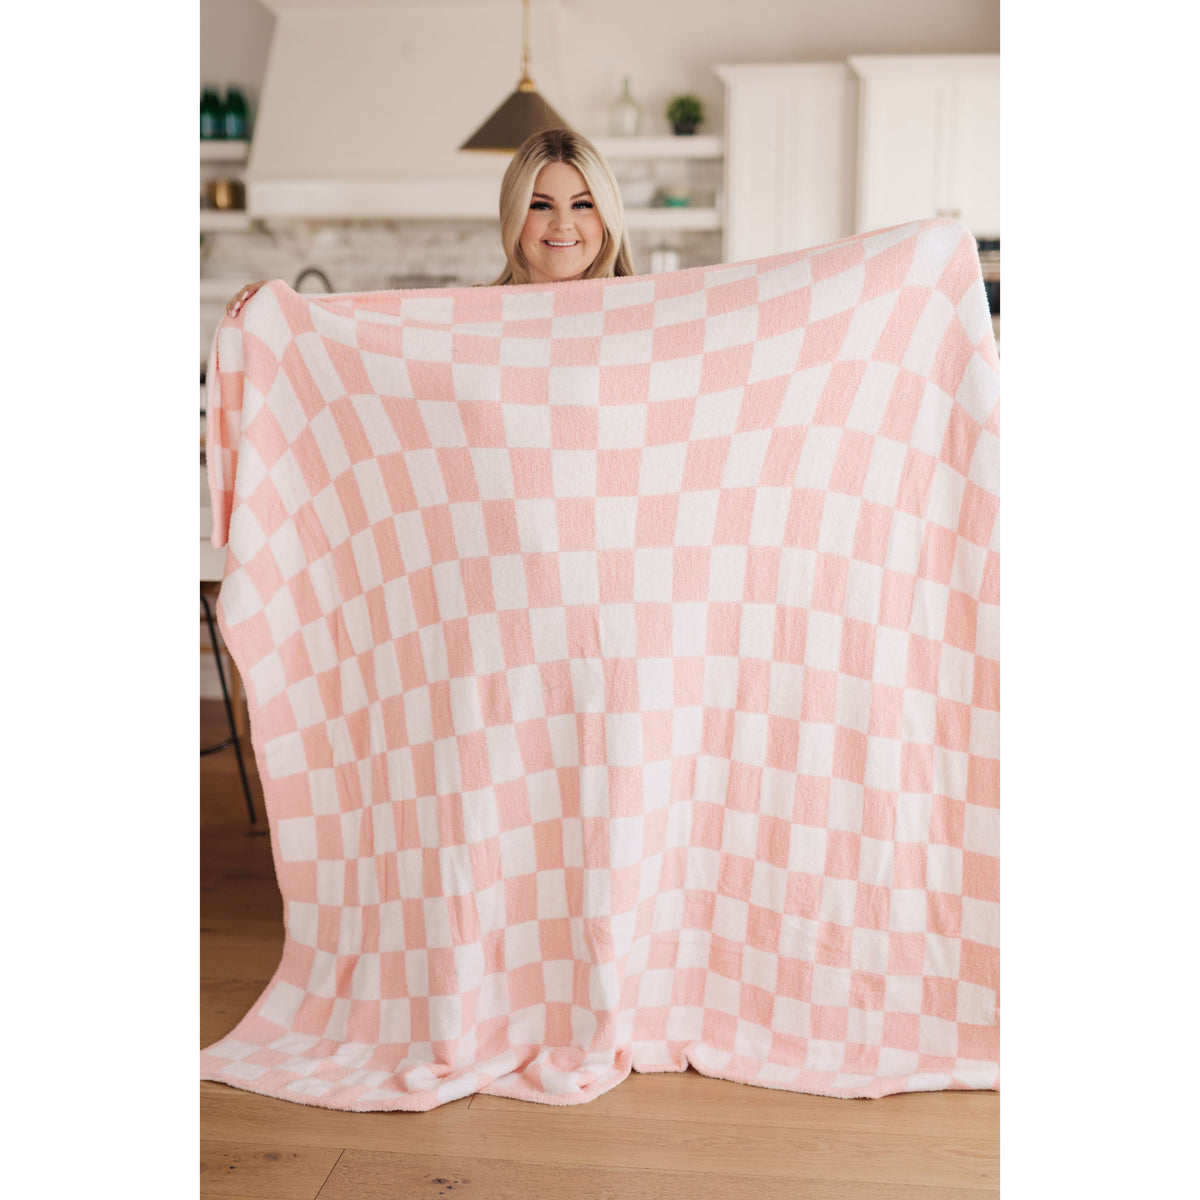 Cuddle Culture | Penny Blanket Single Cuddle Size in Pink Check